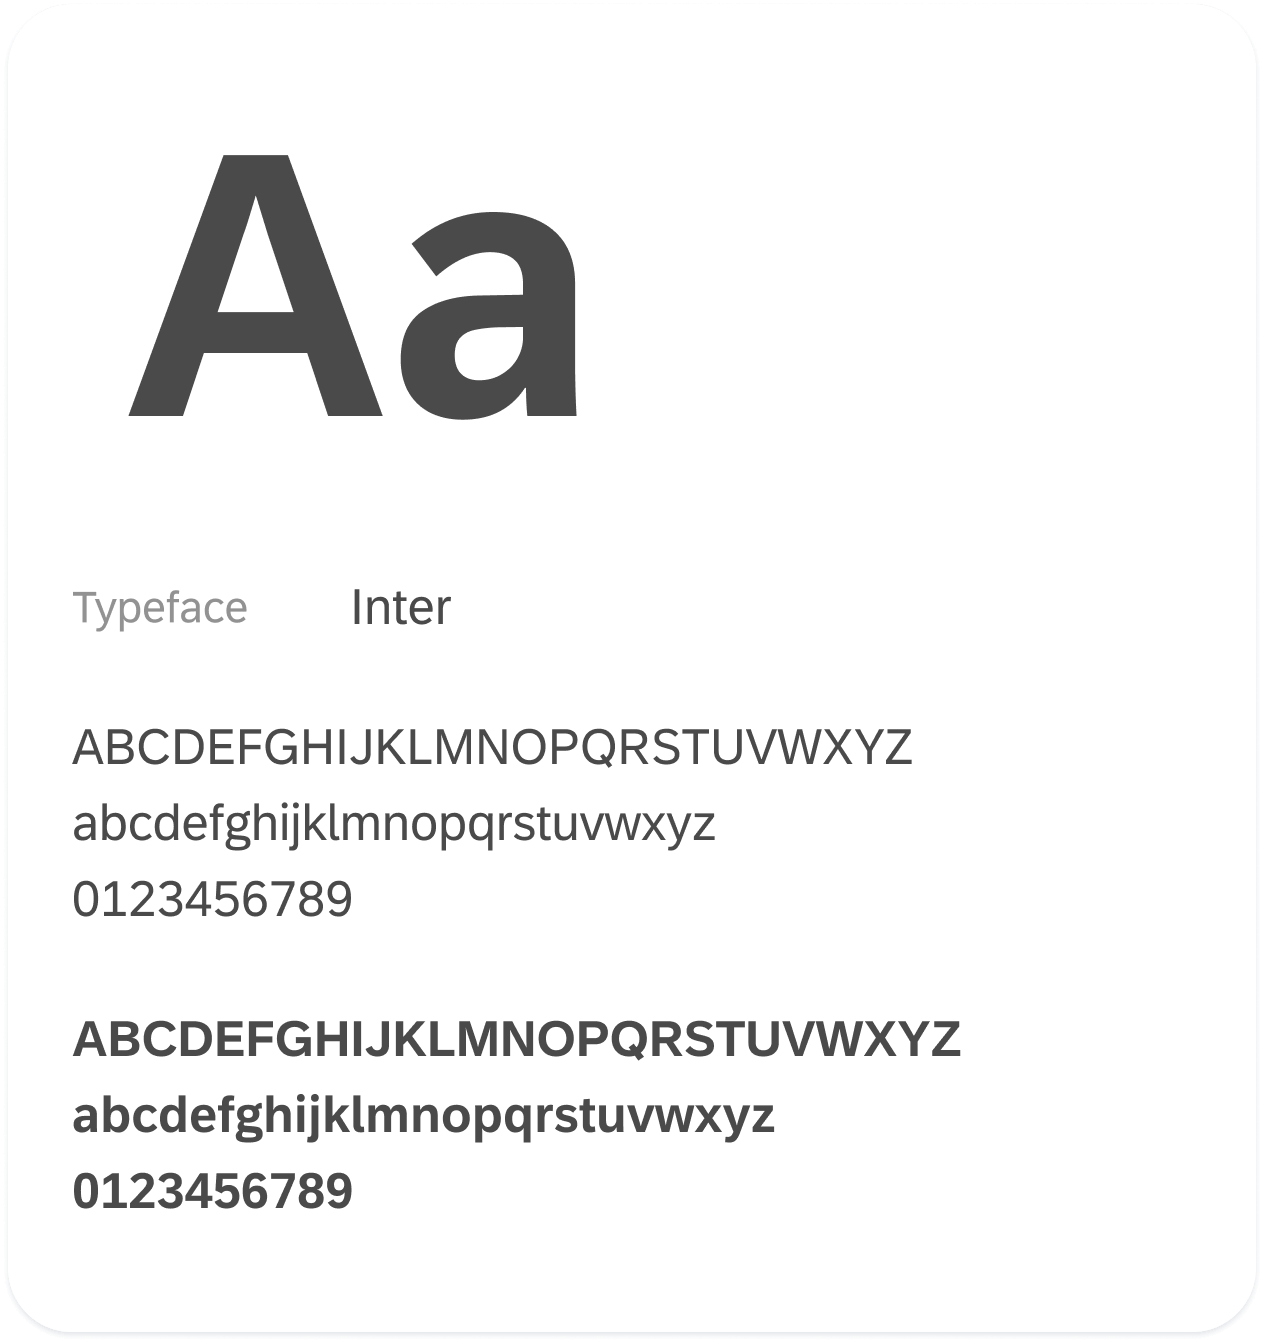 Typography used Inter